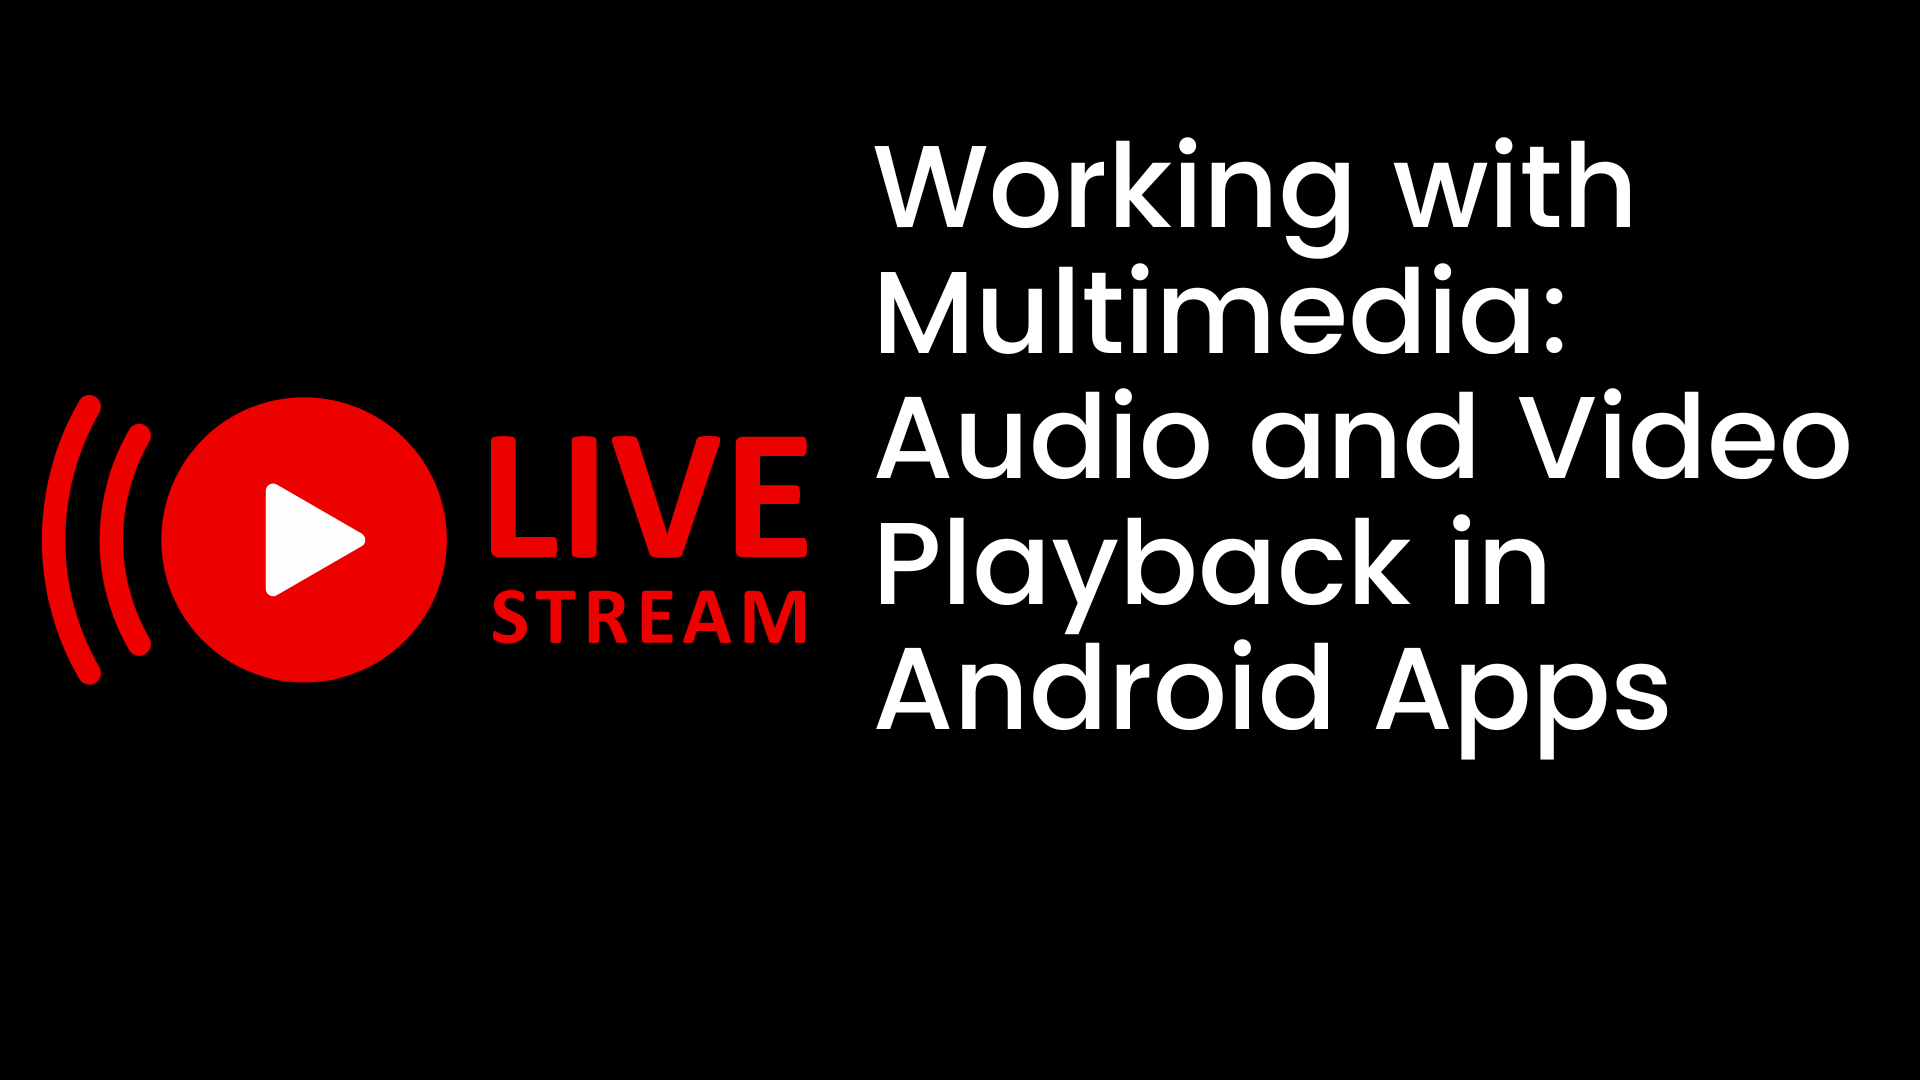 Audio and Video Playback in Android Apps